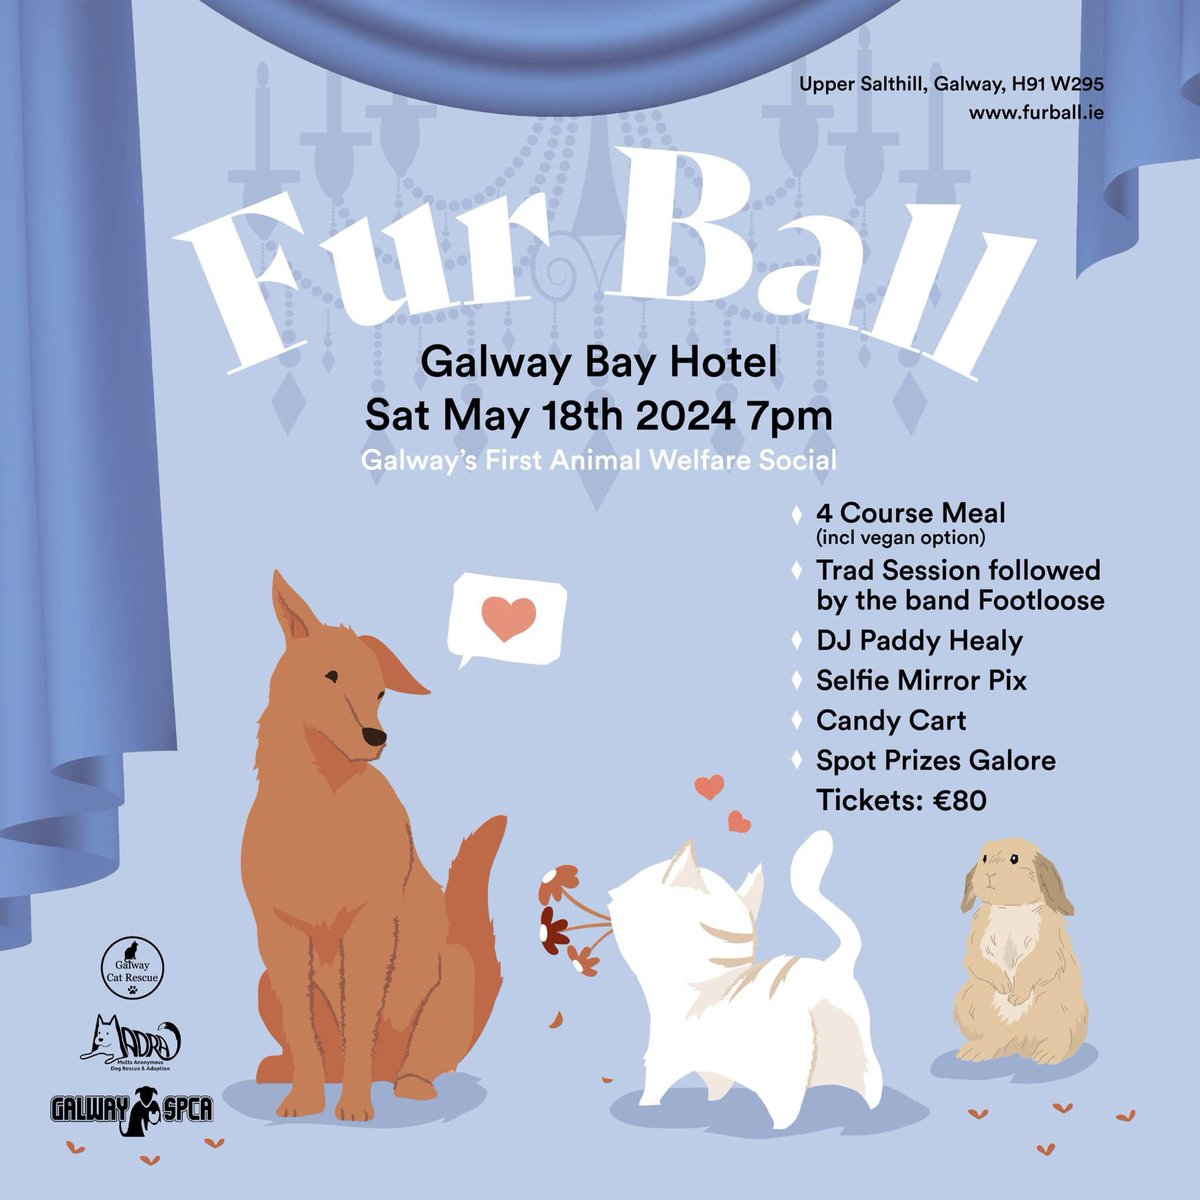 Tickets are now on sale for the very first Fur Ball on Saturday May 18th @GalwayBayHotel 🎉 A fabulous night out to raise funds for us, Galway Cat Rescue (FB) and @GalwaySPCA Online tickets available now👉 :furball.ie 🐕🥂🐈 #AnimalRescue #Galway #Fundraiser